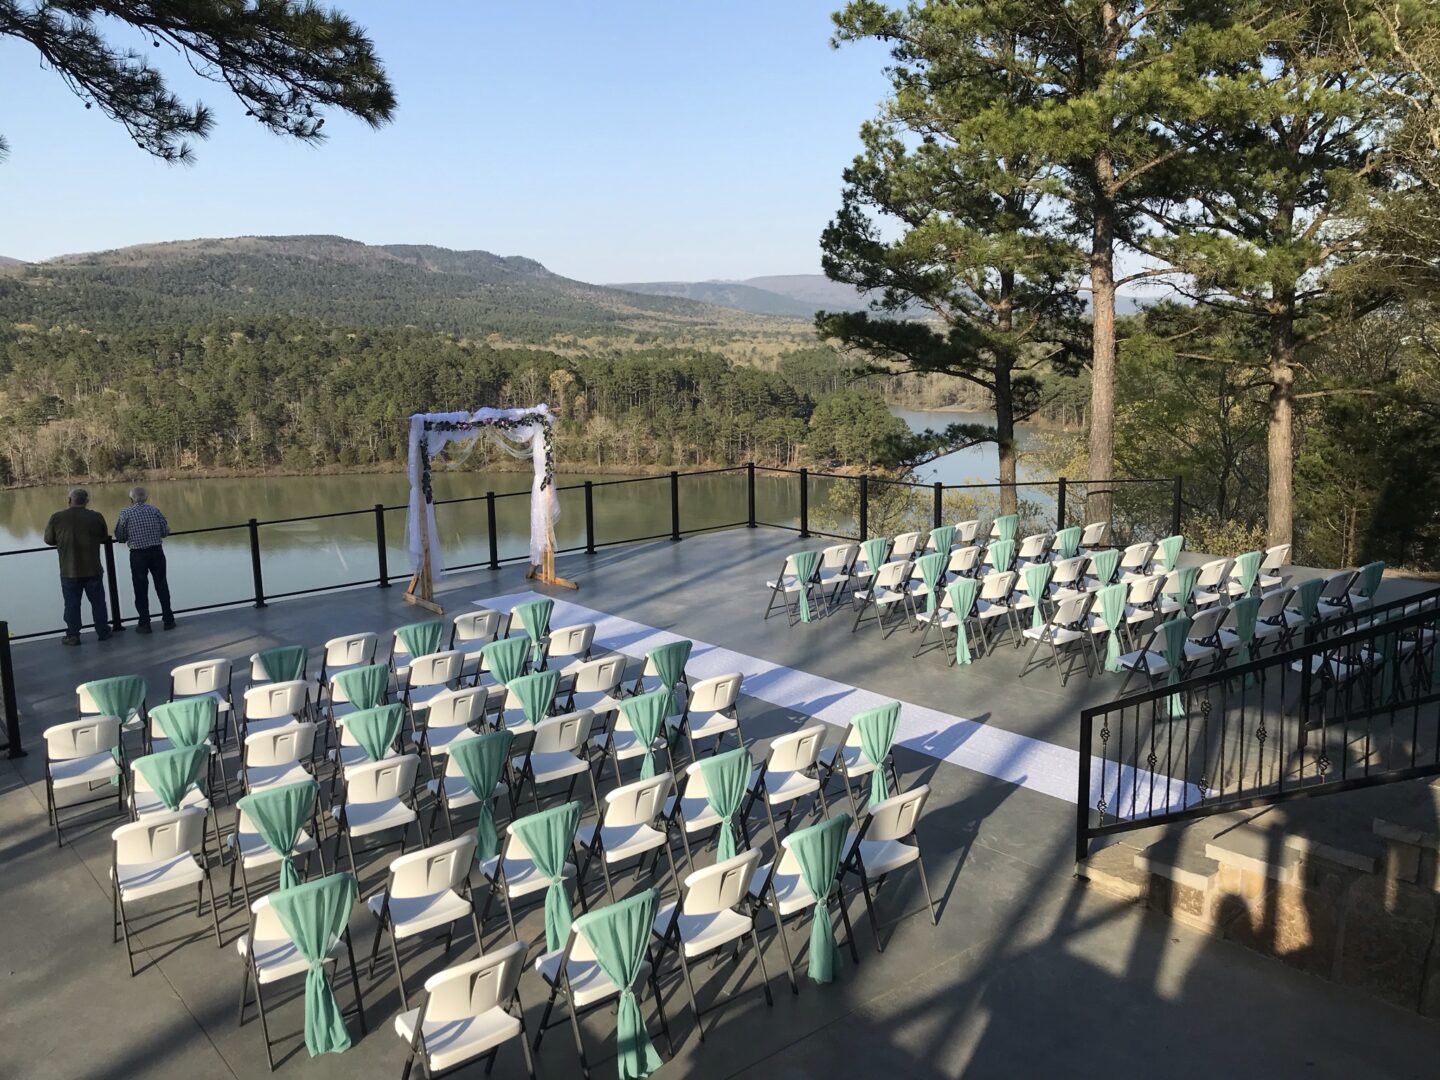 A wedding ceremony with chairs and a lake in the background.